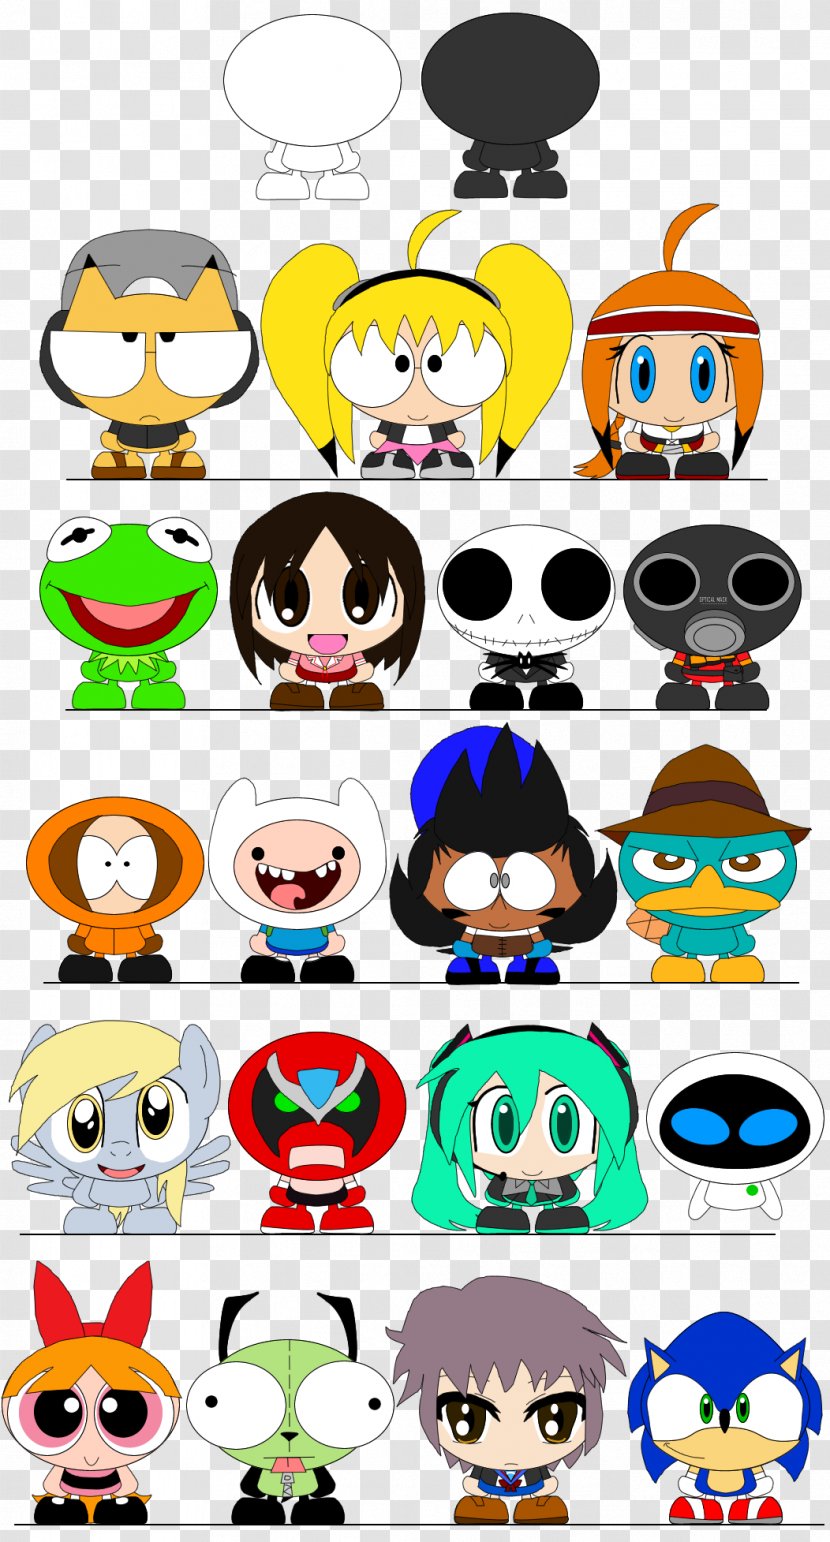 Emoticon Smiley - Glasses - Powerpuff Girls Transparent PNG